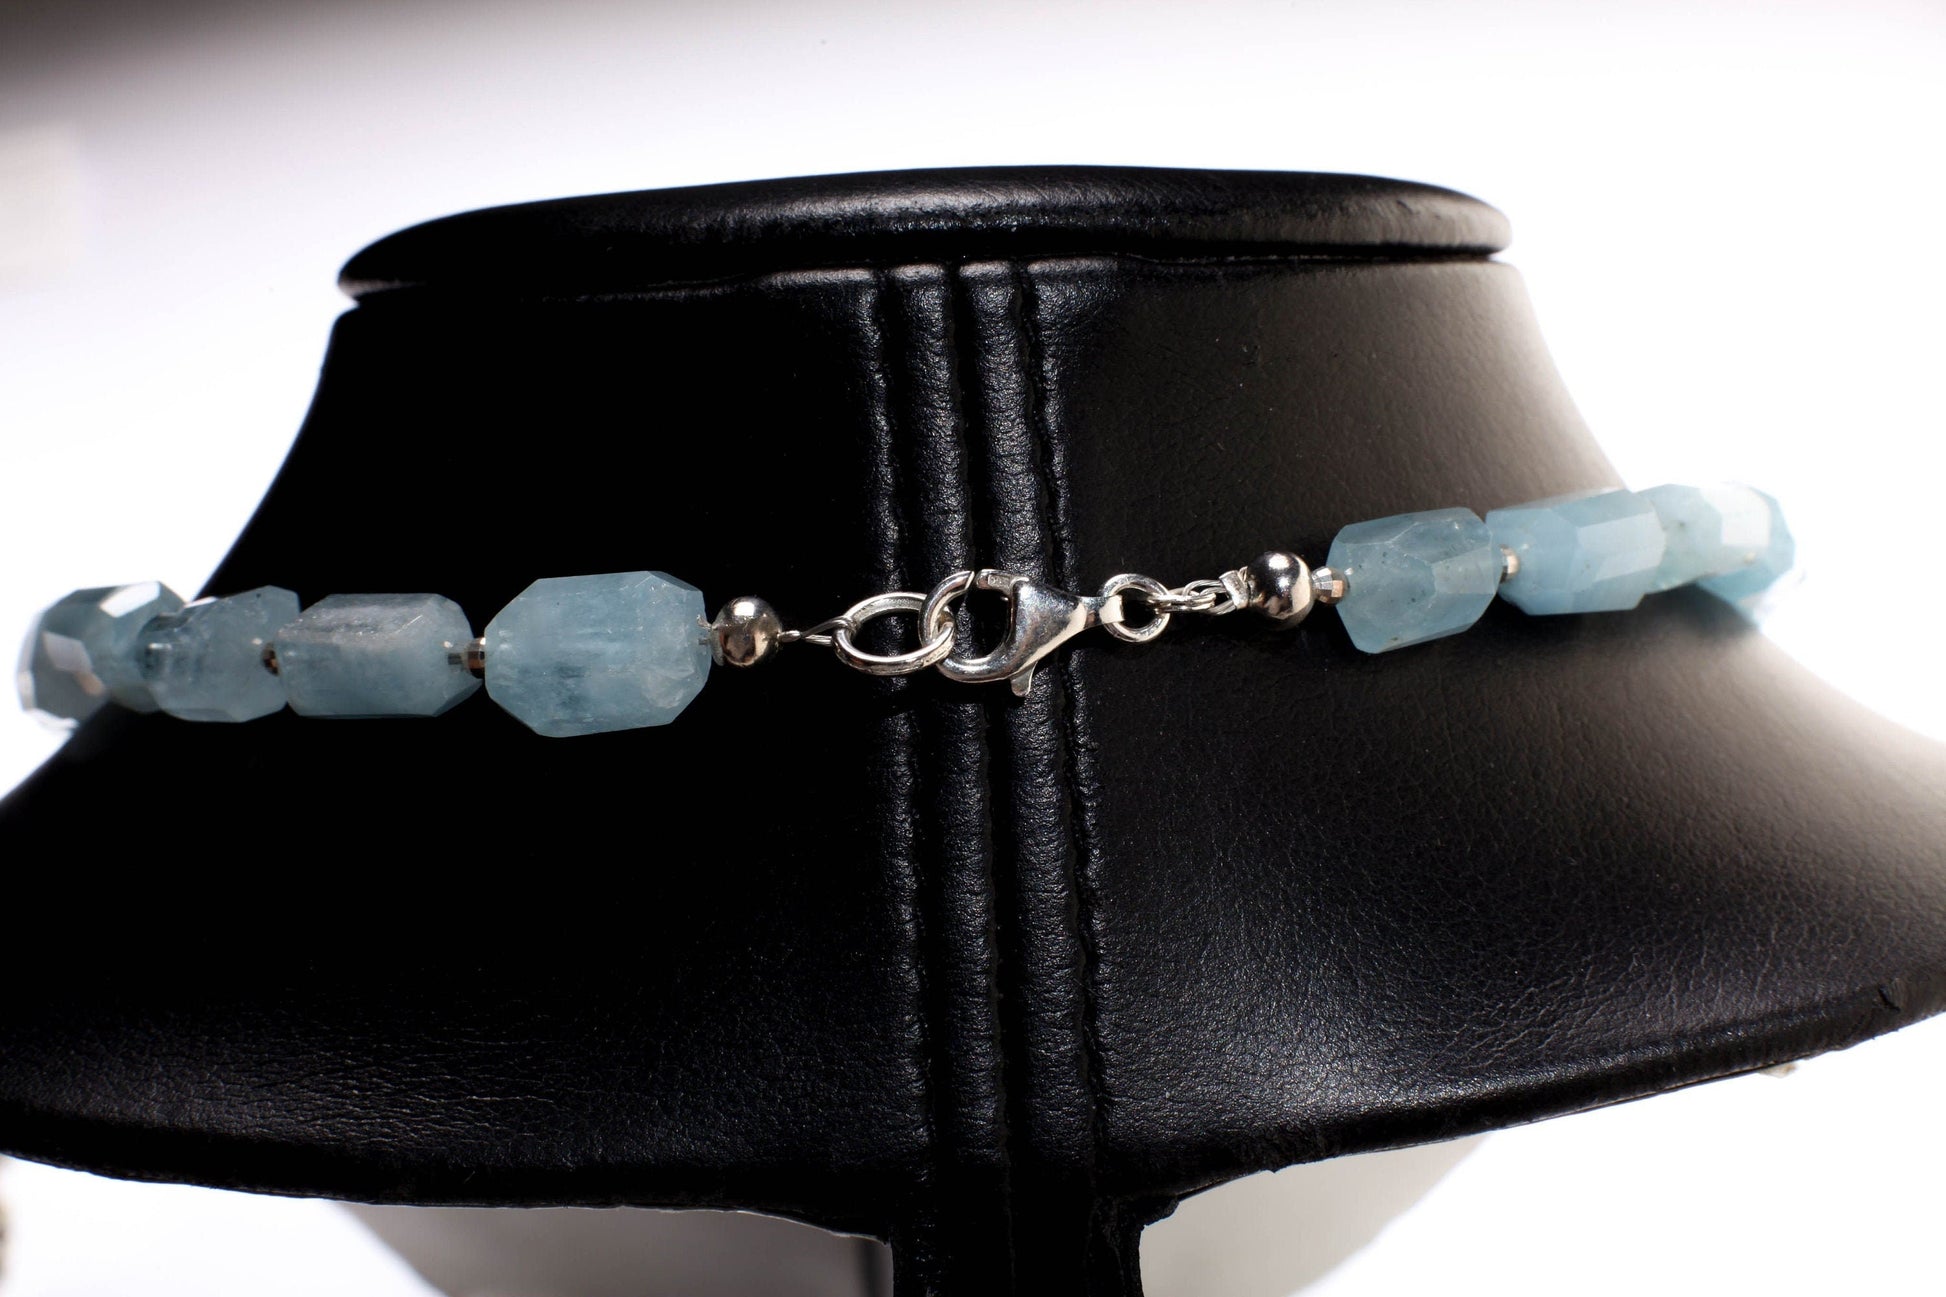 Aquamarine Raw Tumbled Faceted Free Form Barrel 9x14mm, 925 Sterling Silver Diamond Cut Spacer Beads and Lobster Clasp, AAA gems,Woman Gift